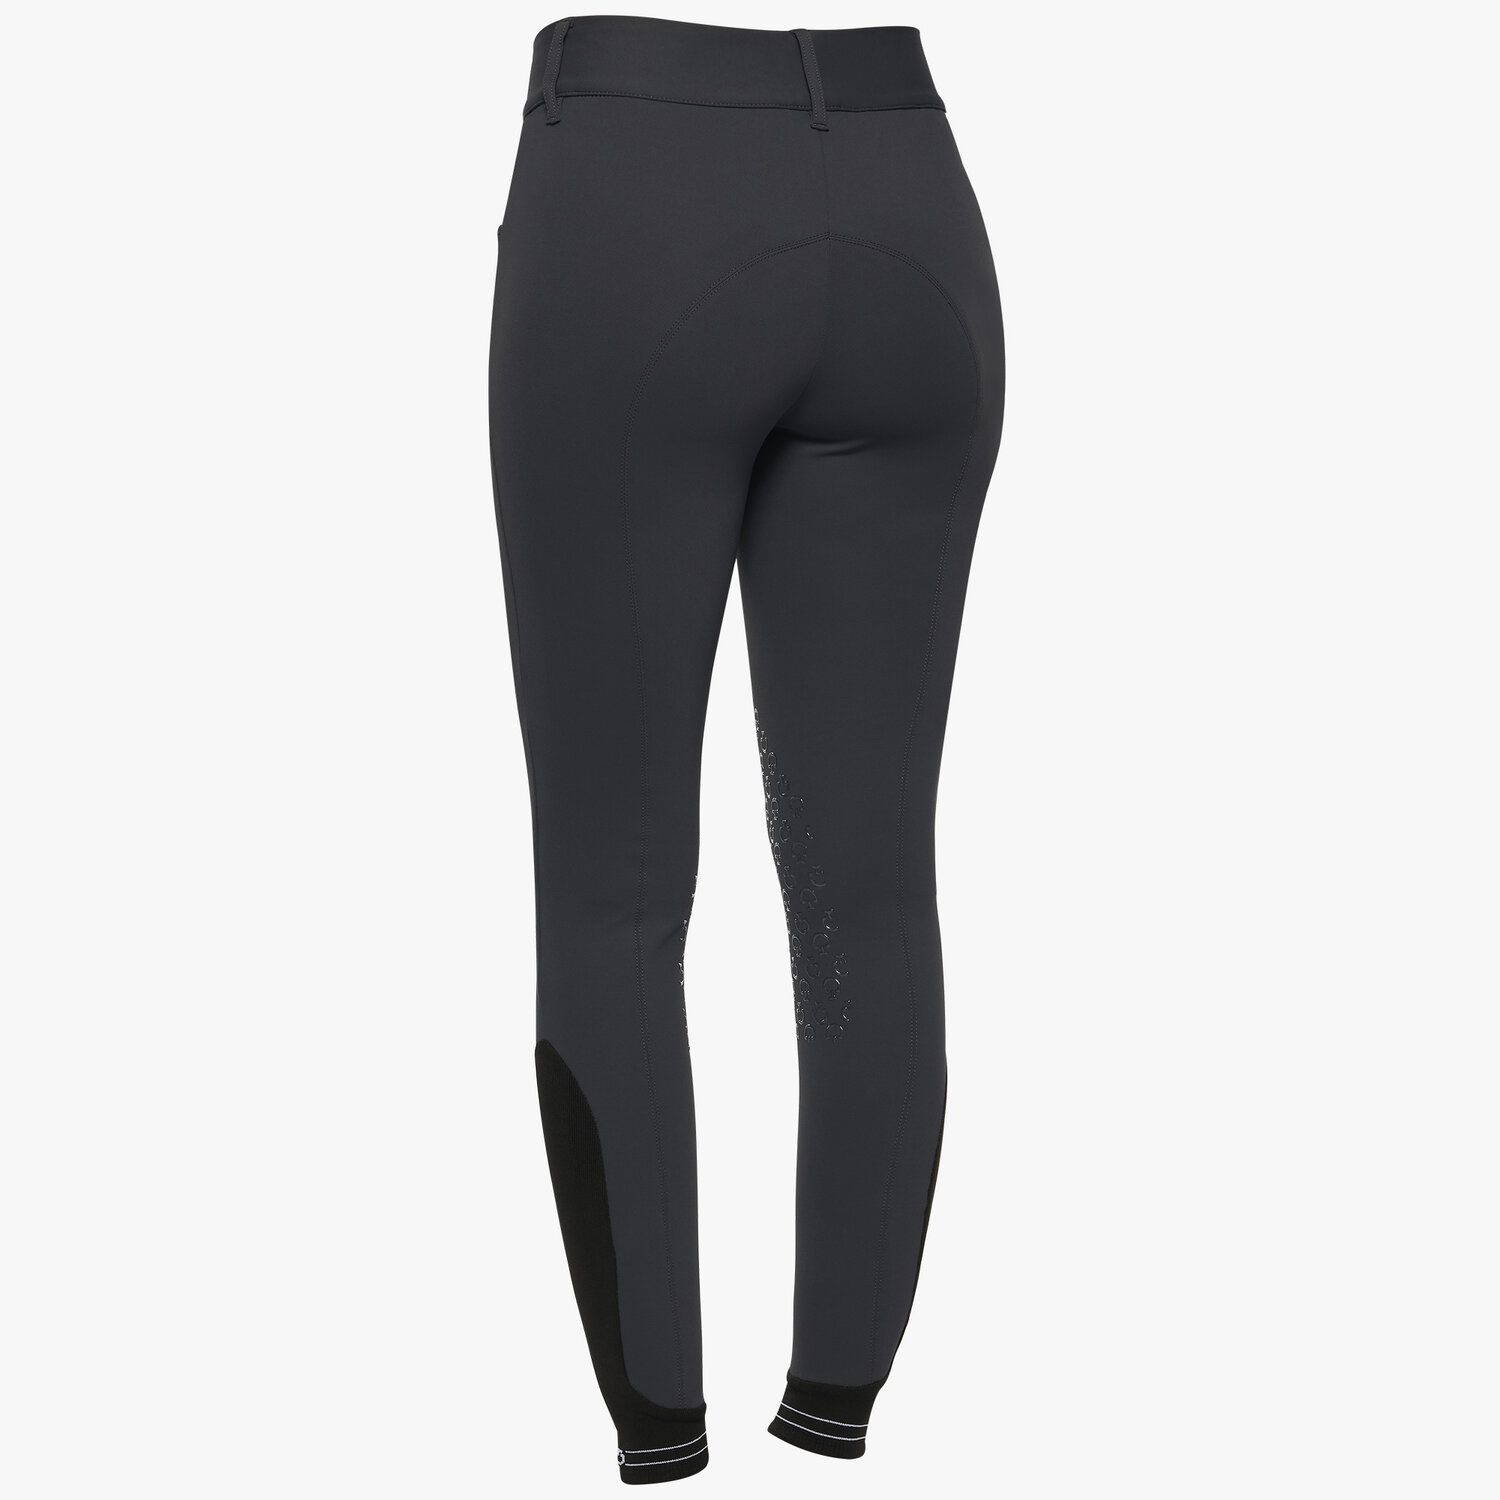 Cavalleria Toscana Women's dressage breeches with perforated logo tape CHARCOAL GREY-3